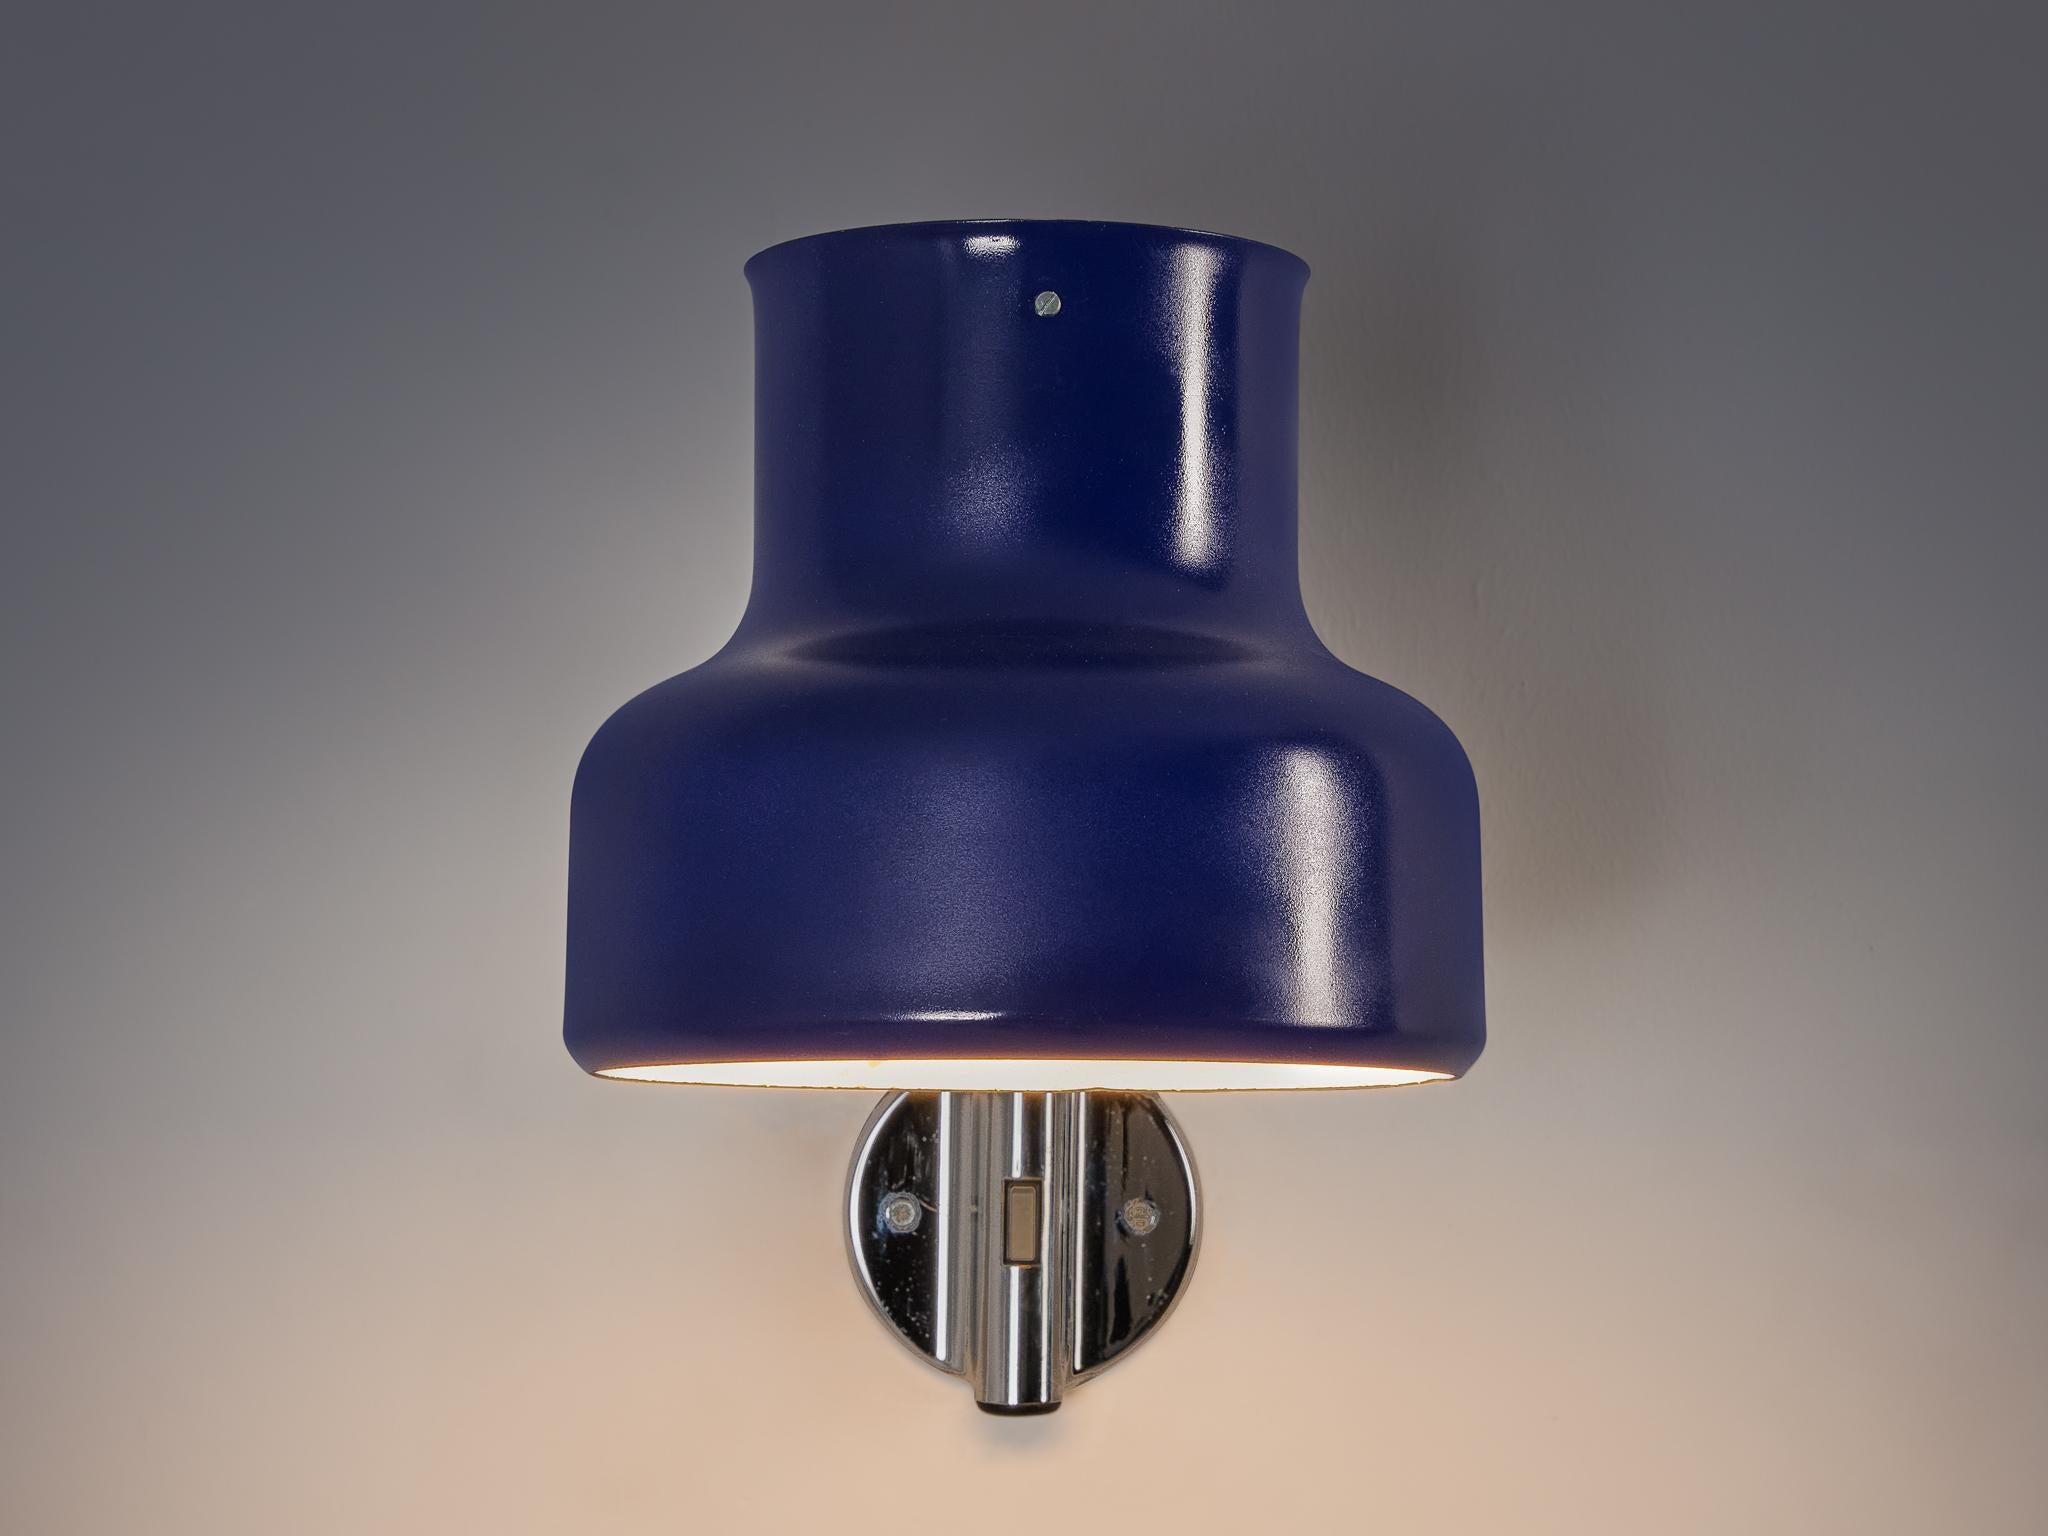 Scandinavian Modern  Anders Pehrson for Ateljé Lyktan 'Bumling' Wall Light with Blue Shade